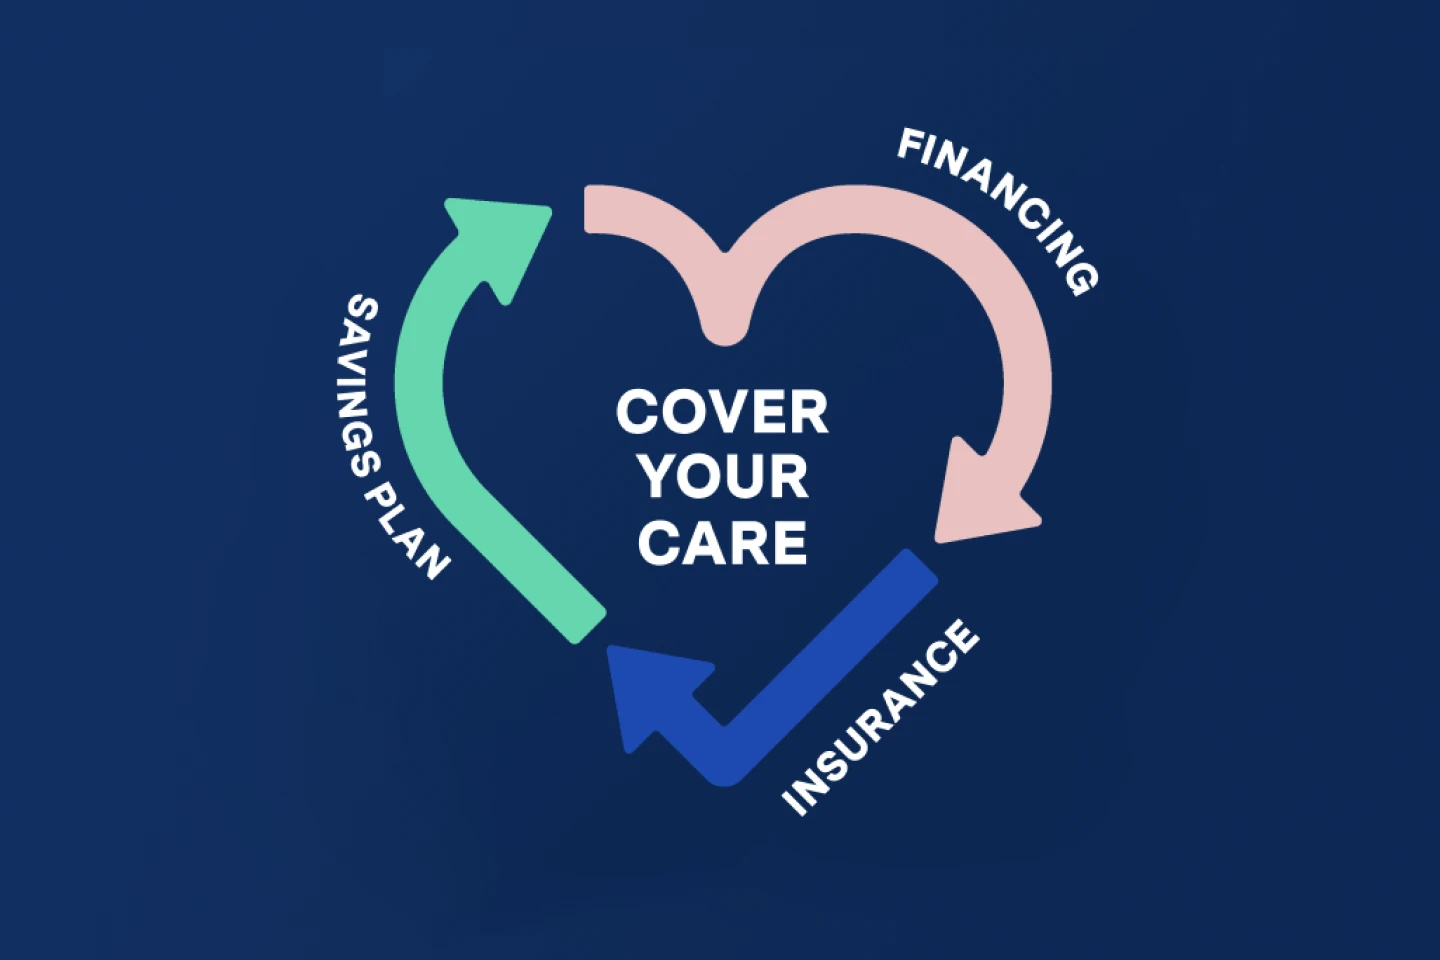 A heart shaped graphic with arrows and the words Cover your care in the center, representing dental financing options available at Aspen Dental link:
Aspen Dental Savings Plan
Dental Financing and
Dental Insurance